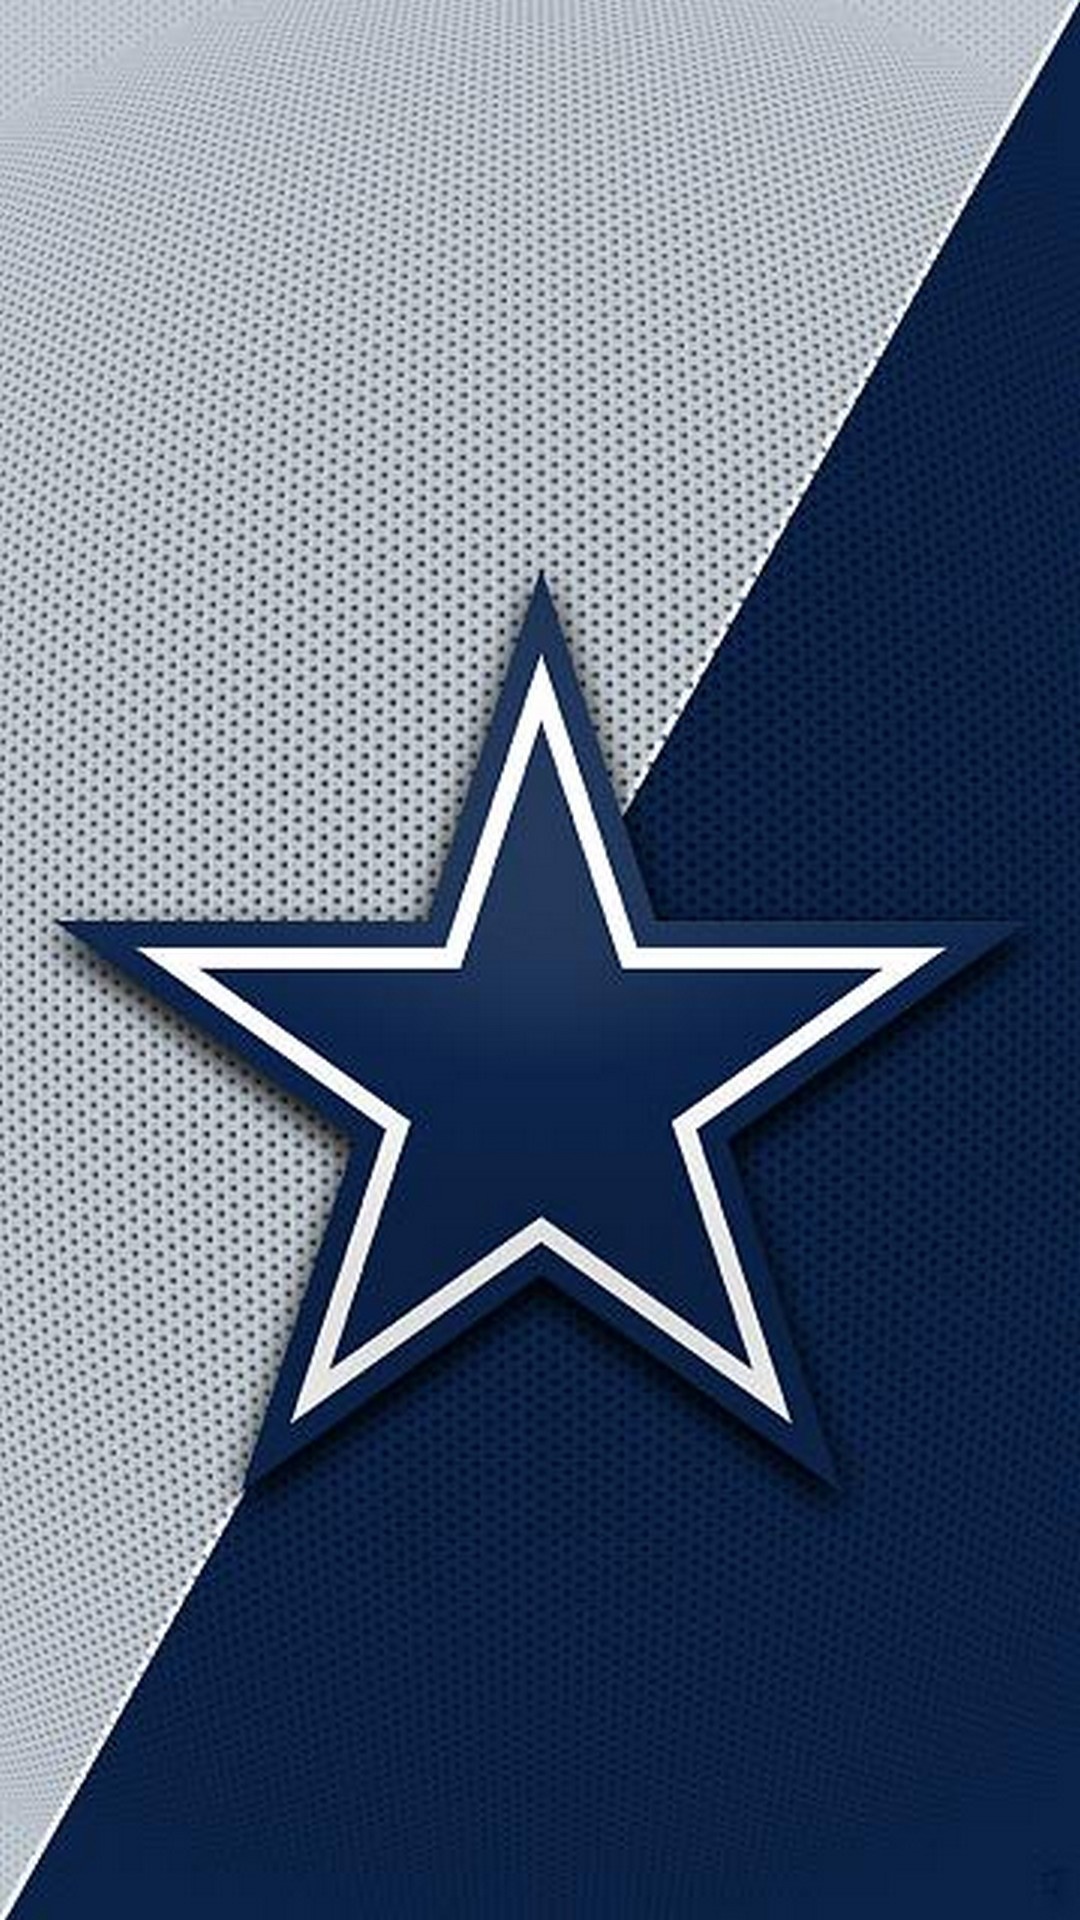 Dallas Cowboys: The team have lost to the Pittsburgh Steelers in Super Bowl X. 1080x1920 Full HD Wallpaper.